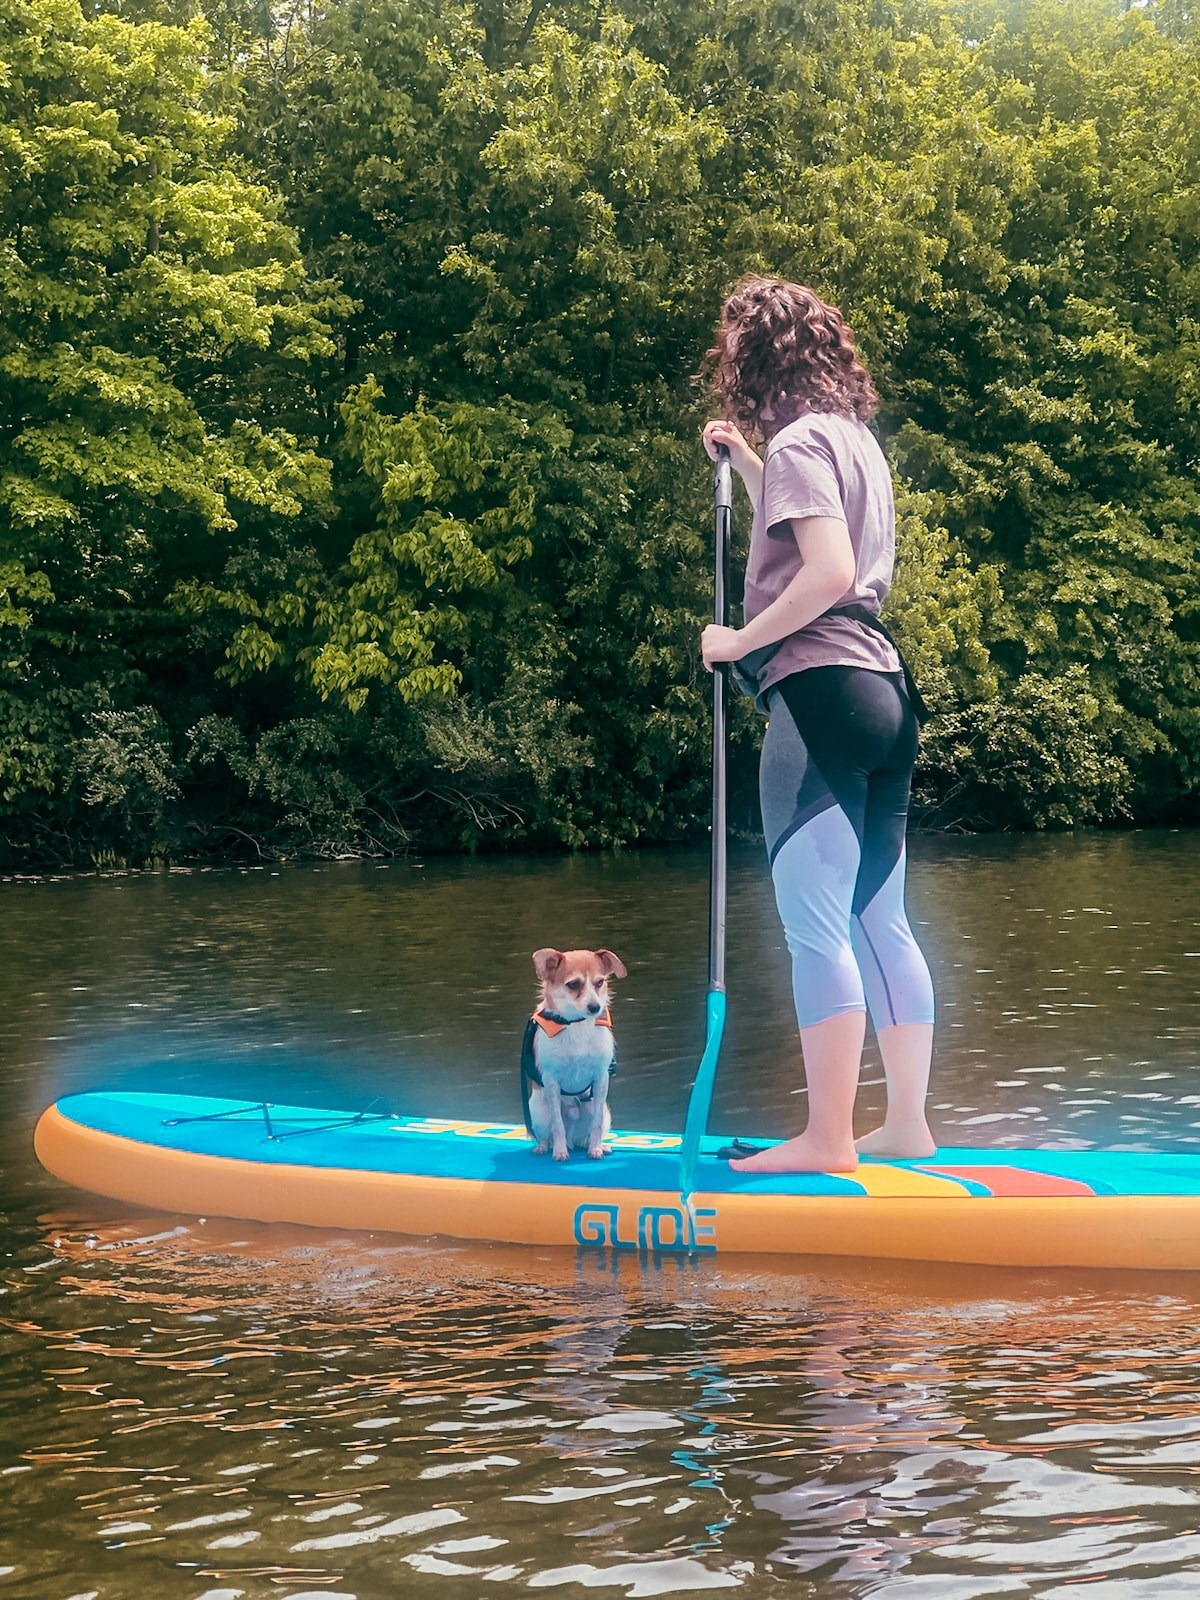 fishing paddle boards are an inflatable stand up paddle board